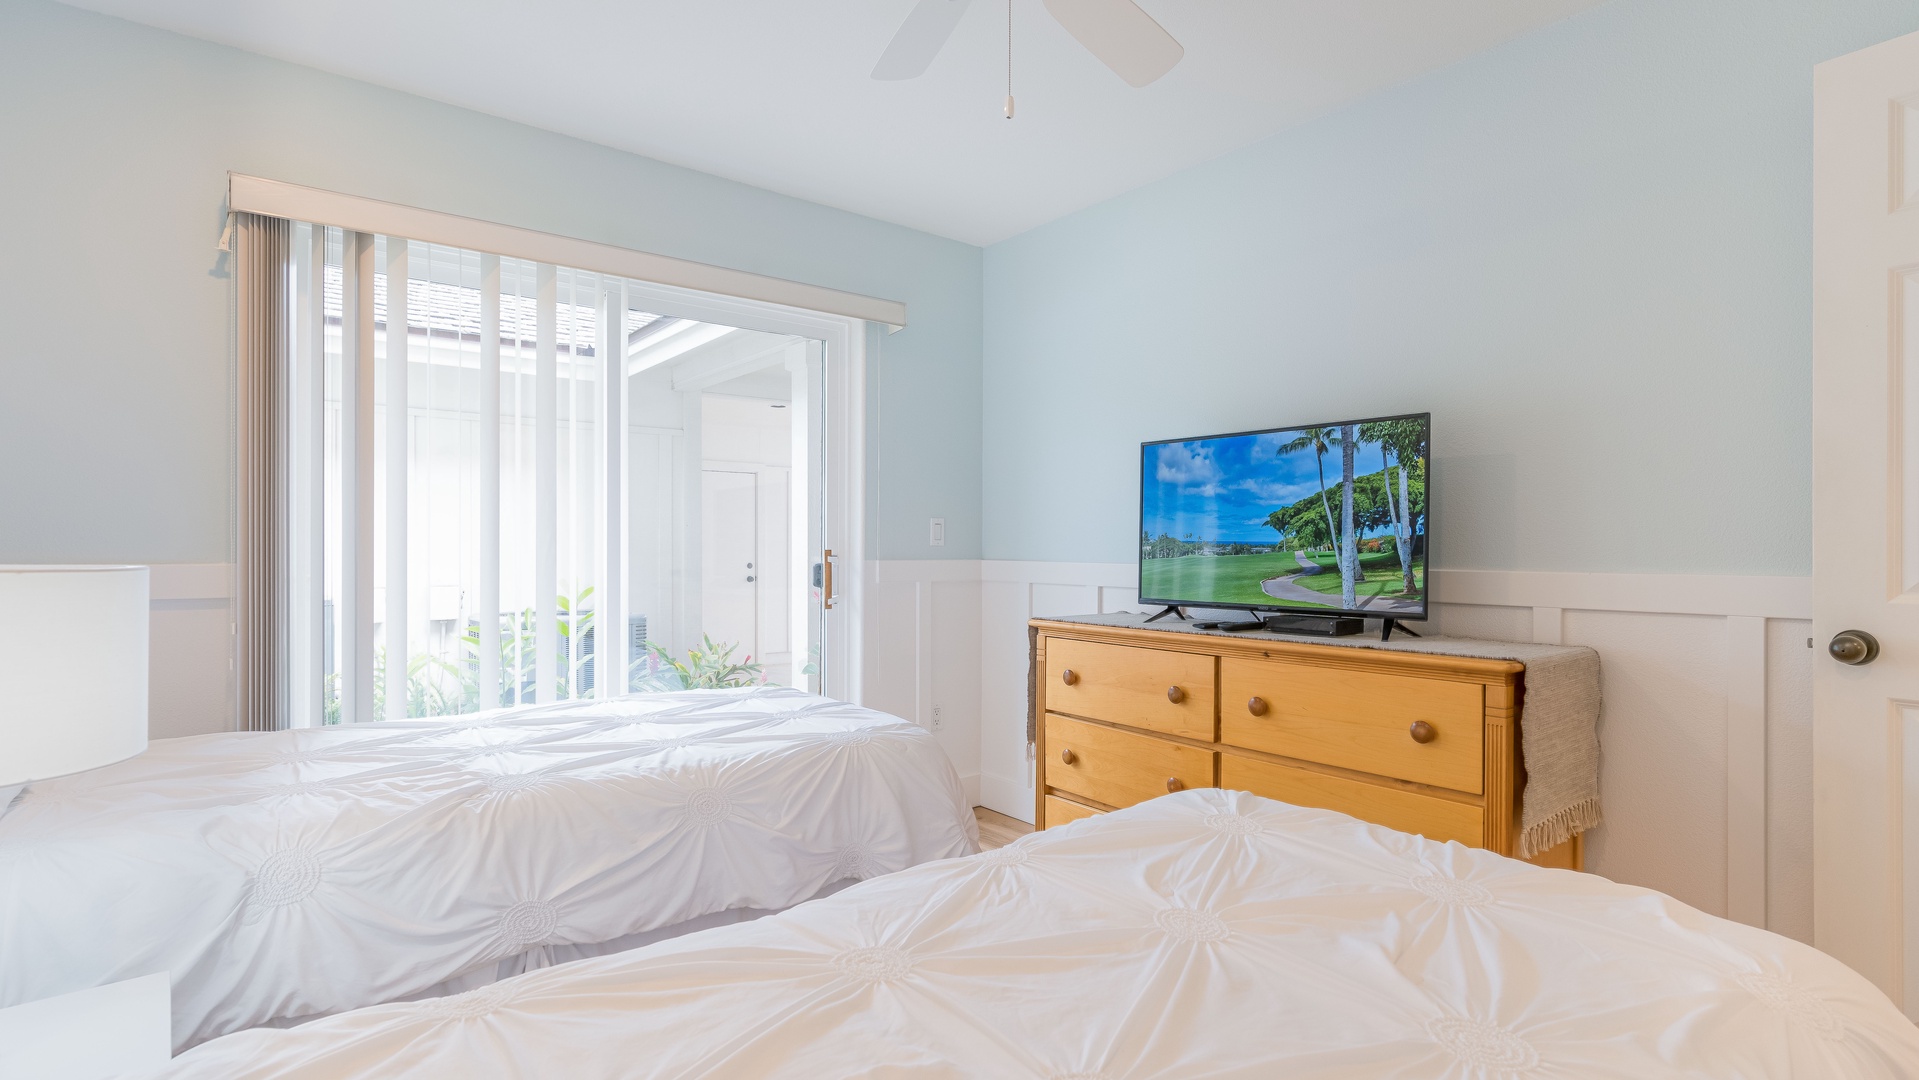 Kapolei Vacation Rentals, Coconut Plantation 1110-3 - The second guest bedroom with a television and dresser.